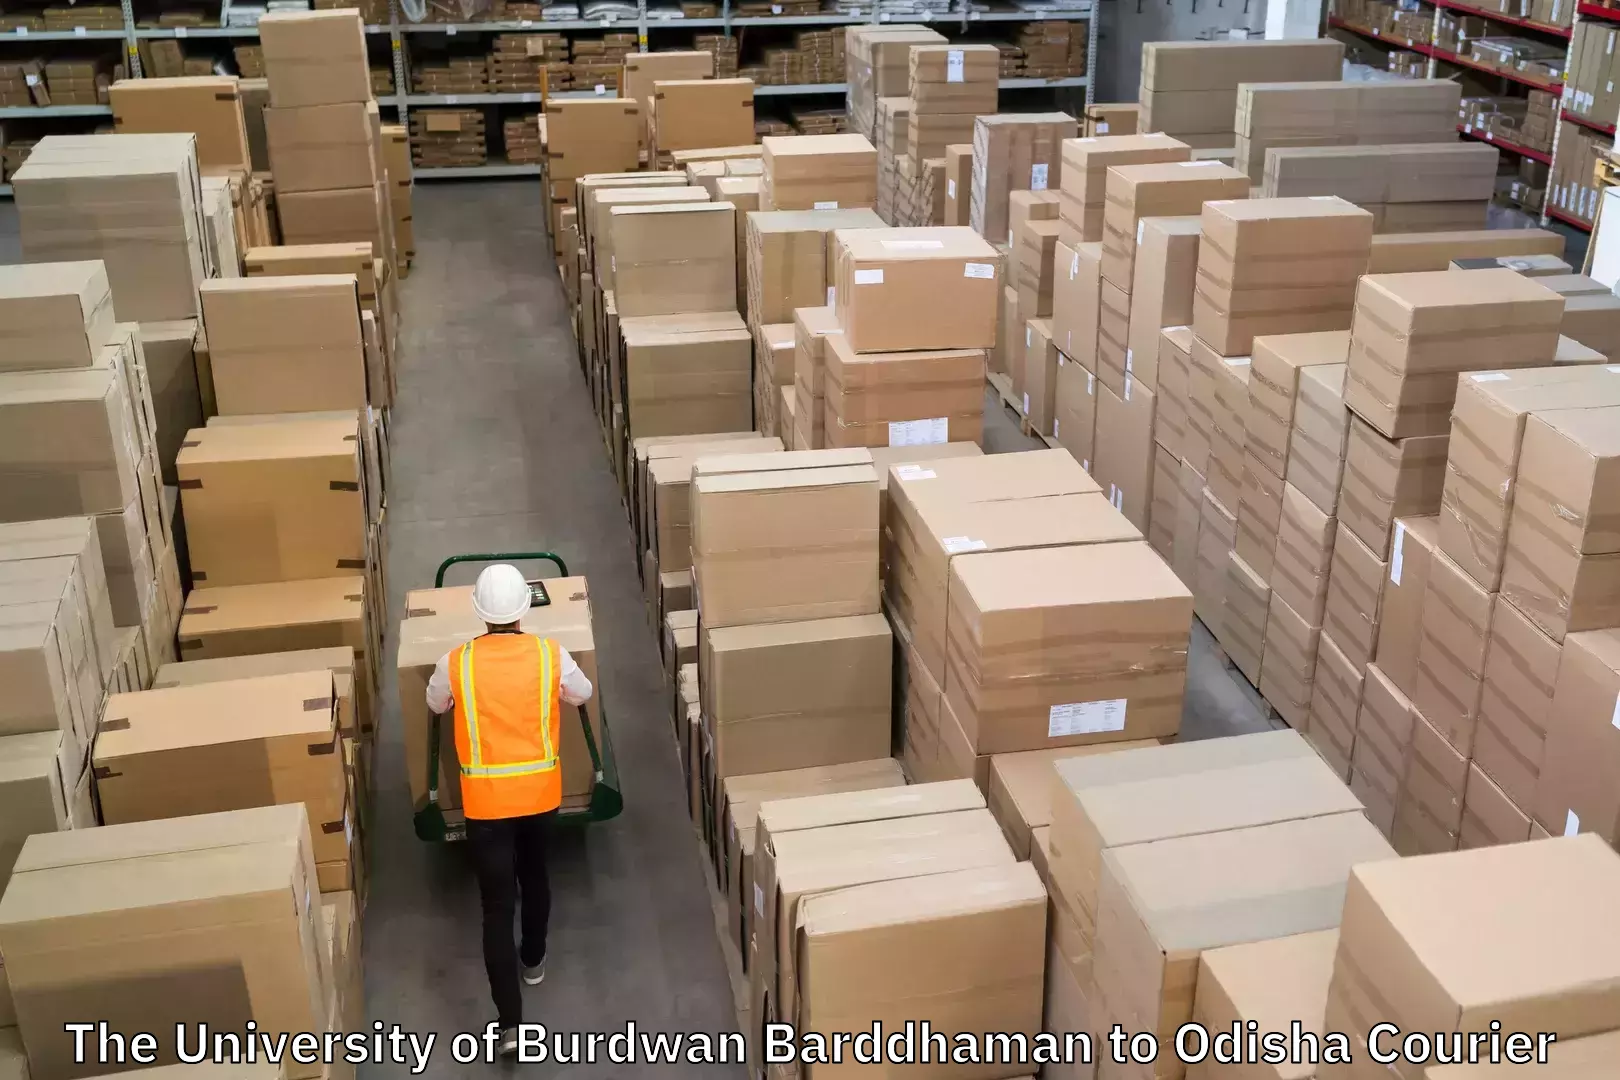 High-capacity courier solutions The University of Burdwan Barddhaman to Odisha